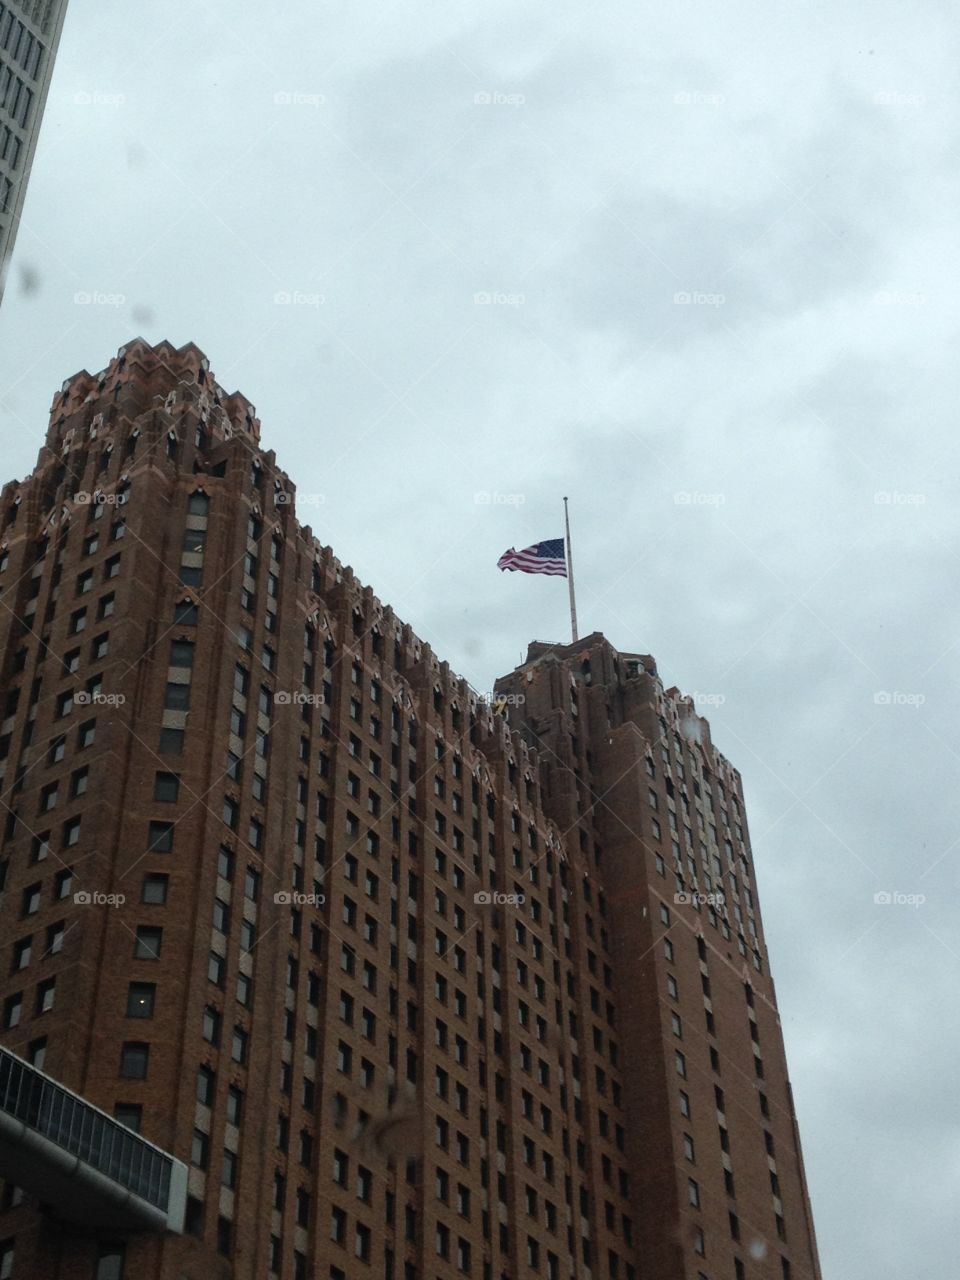 America Stands Strong . September 11, 2015...a lone American flag waved atop this building in Detroit as the rain sprinkled.